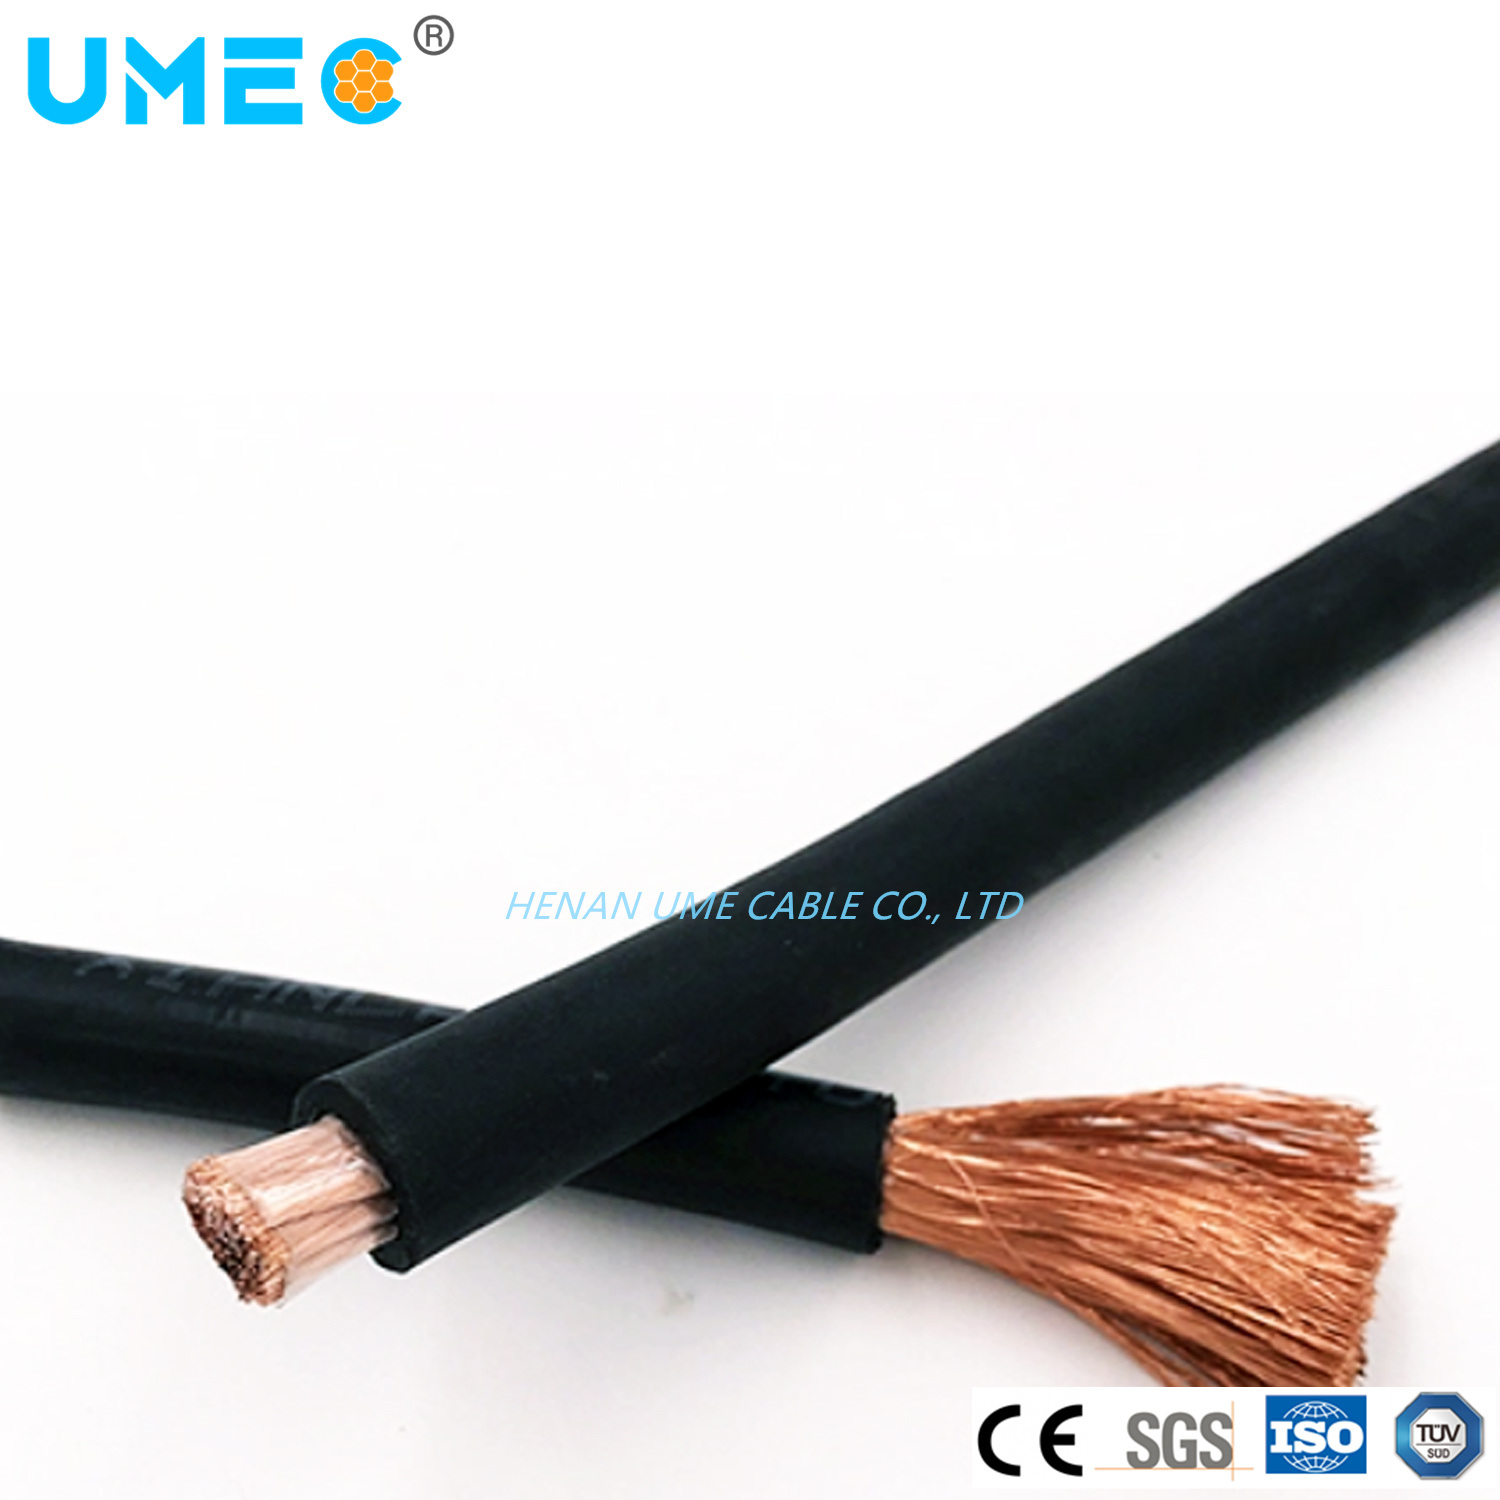 Silicone Rubber Electrical Rubber Cable Neoprene Rubber or Other Synthetic Sheath Welding Cable Yhf